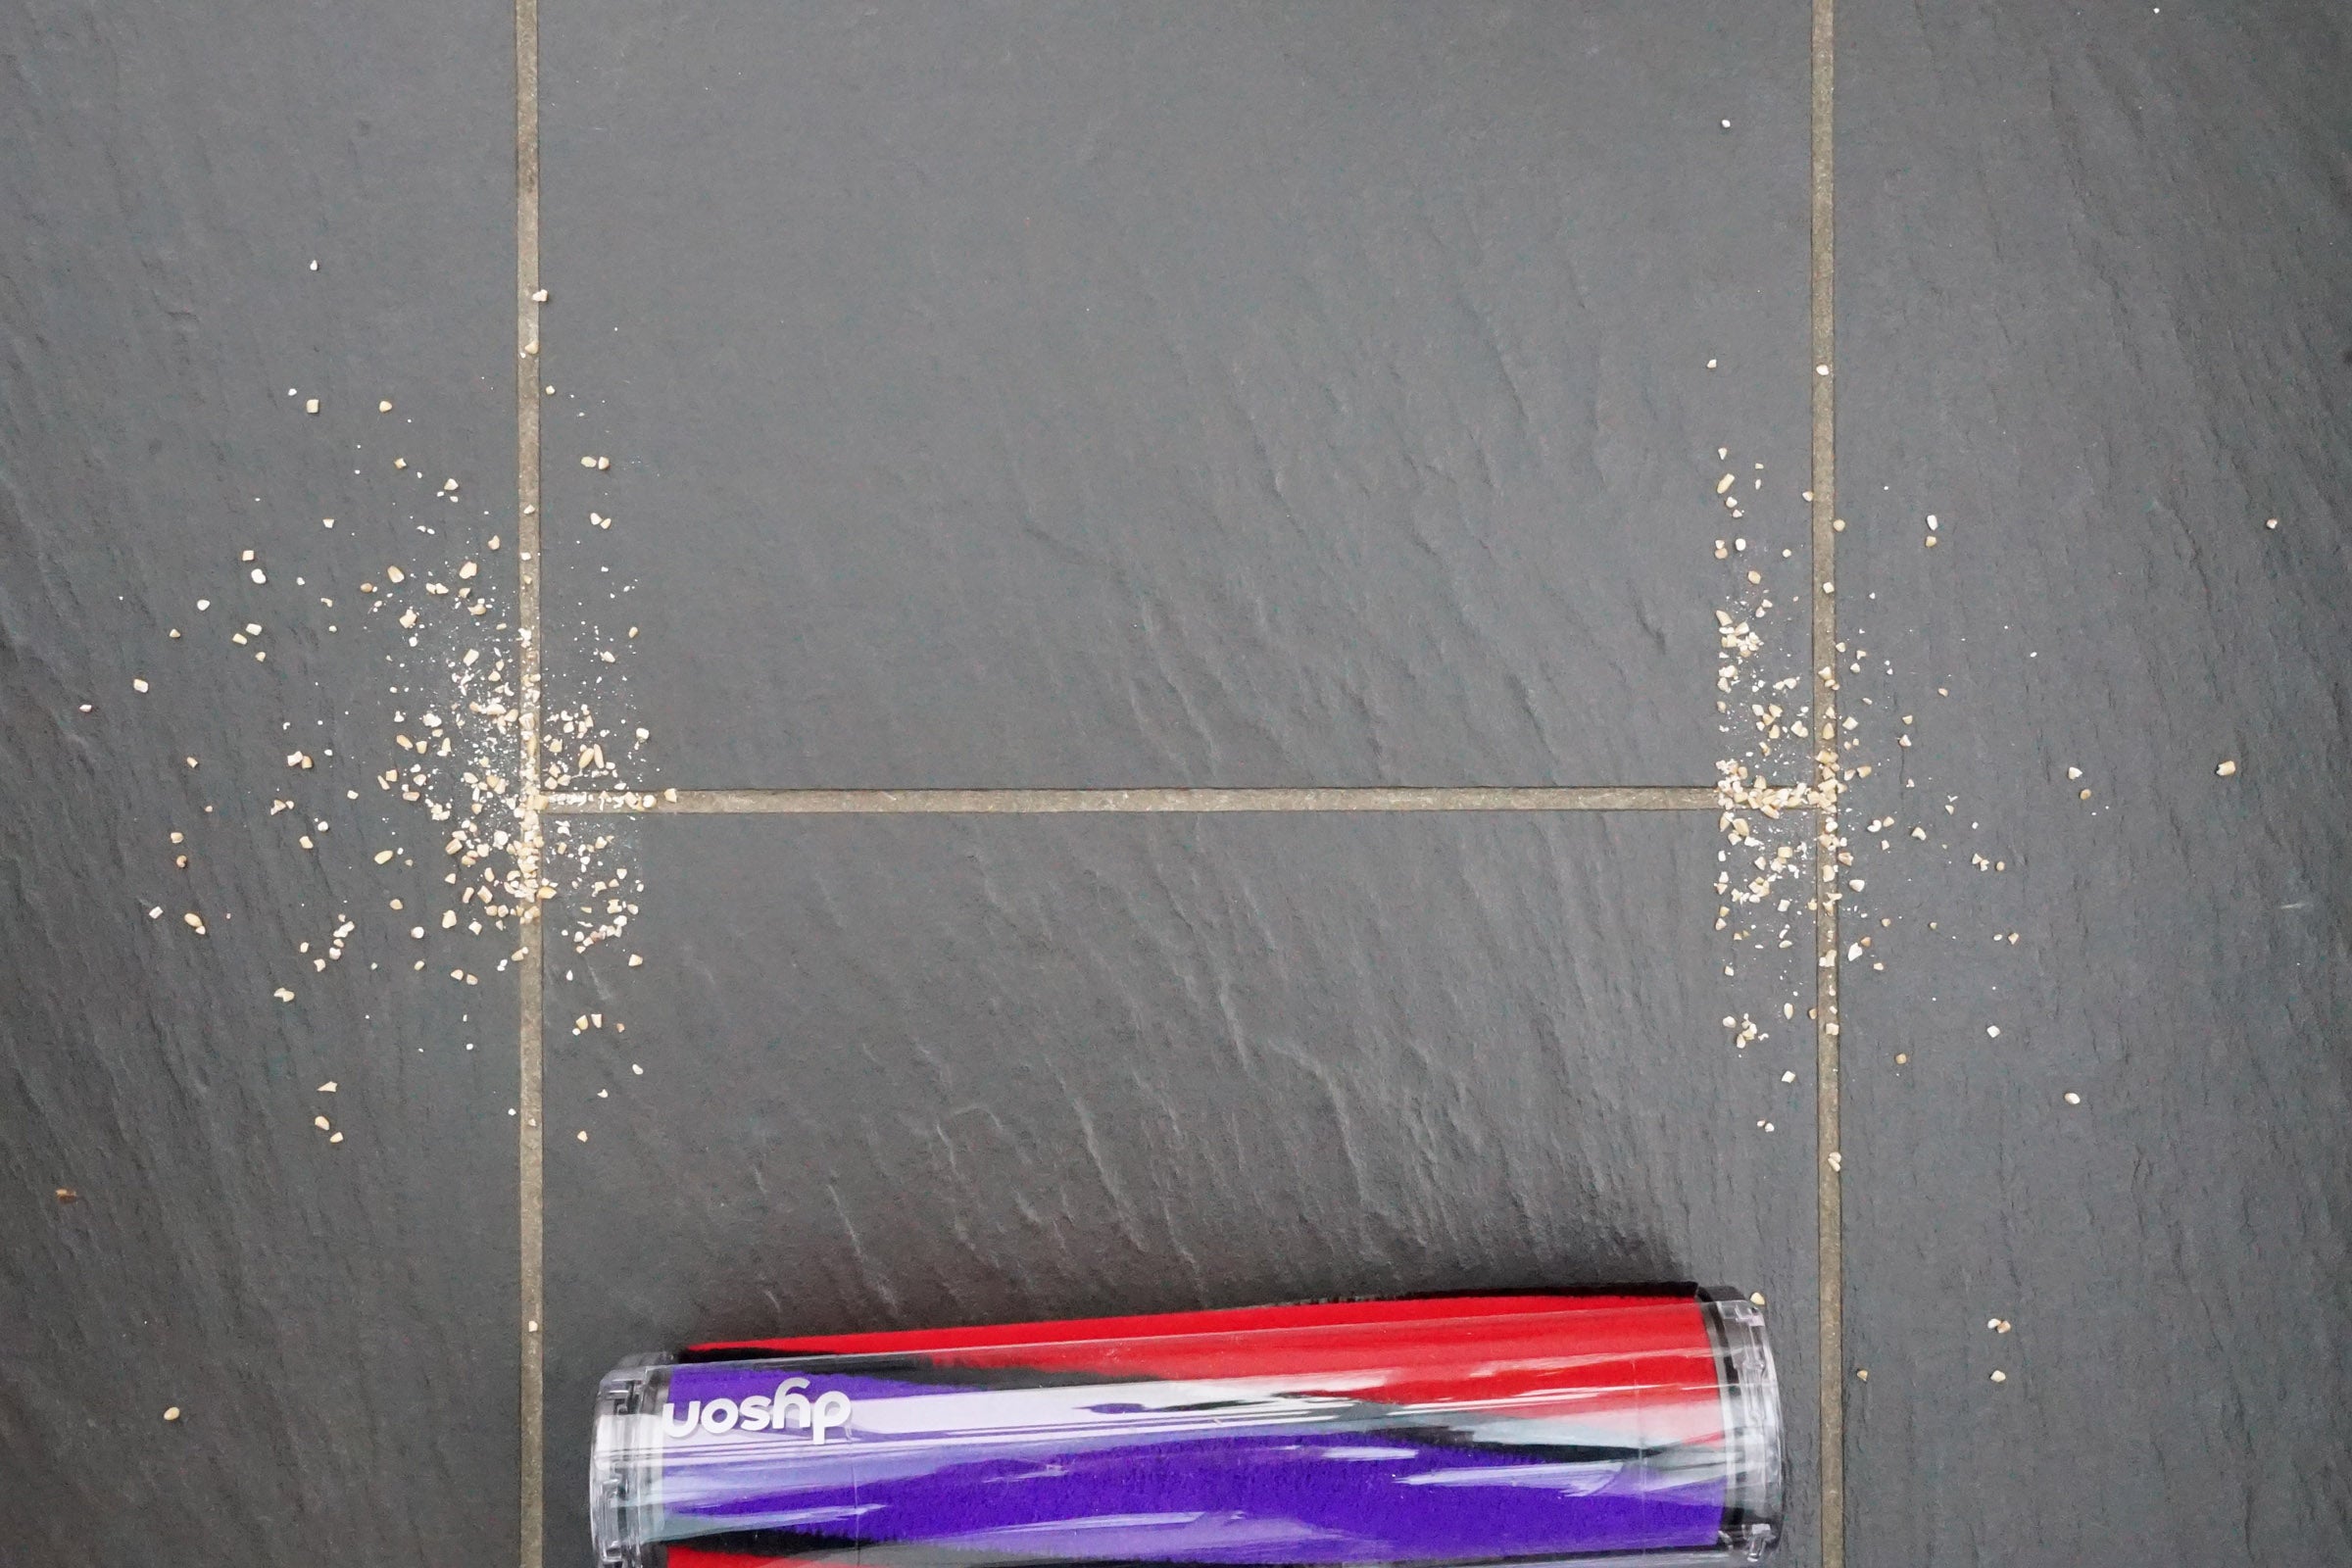 Dyson Cyclone V10 vacuum cleaning debris from floor.